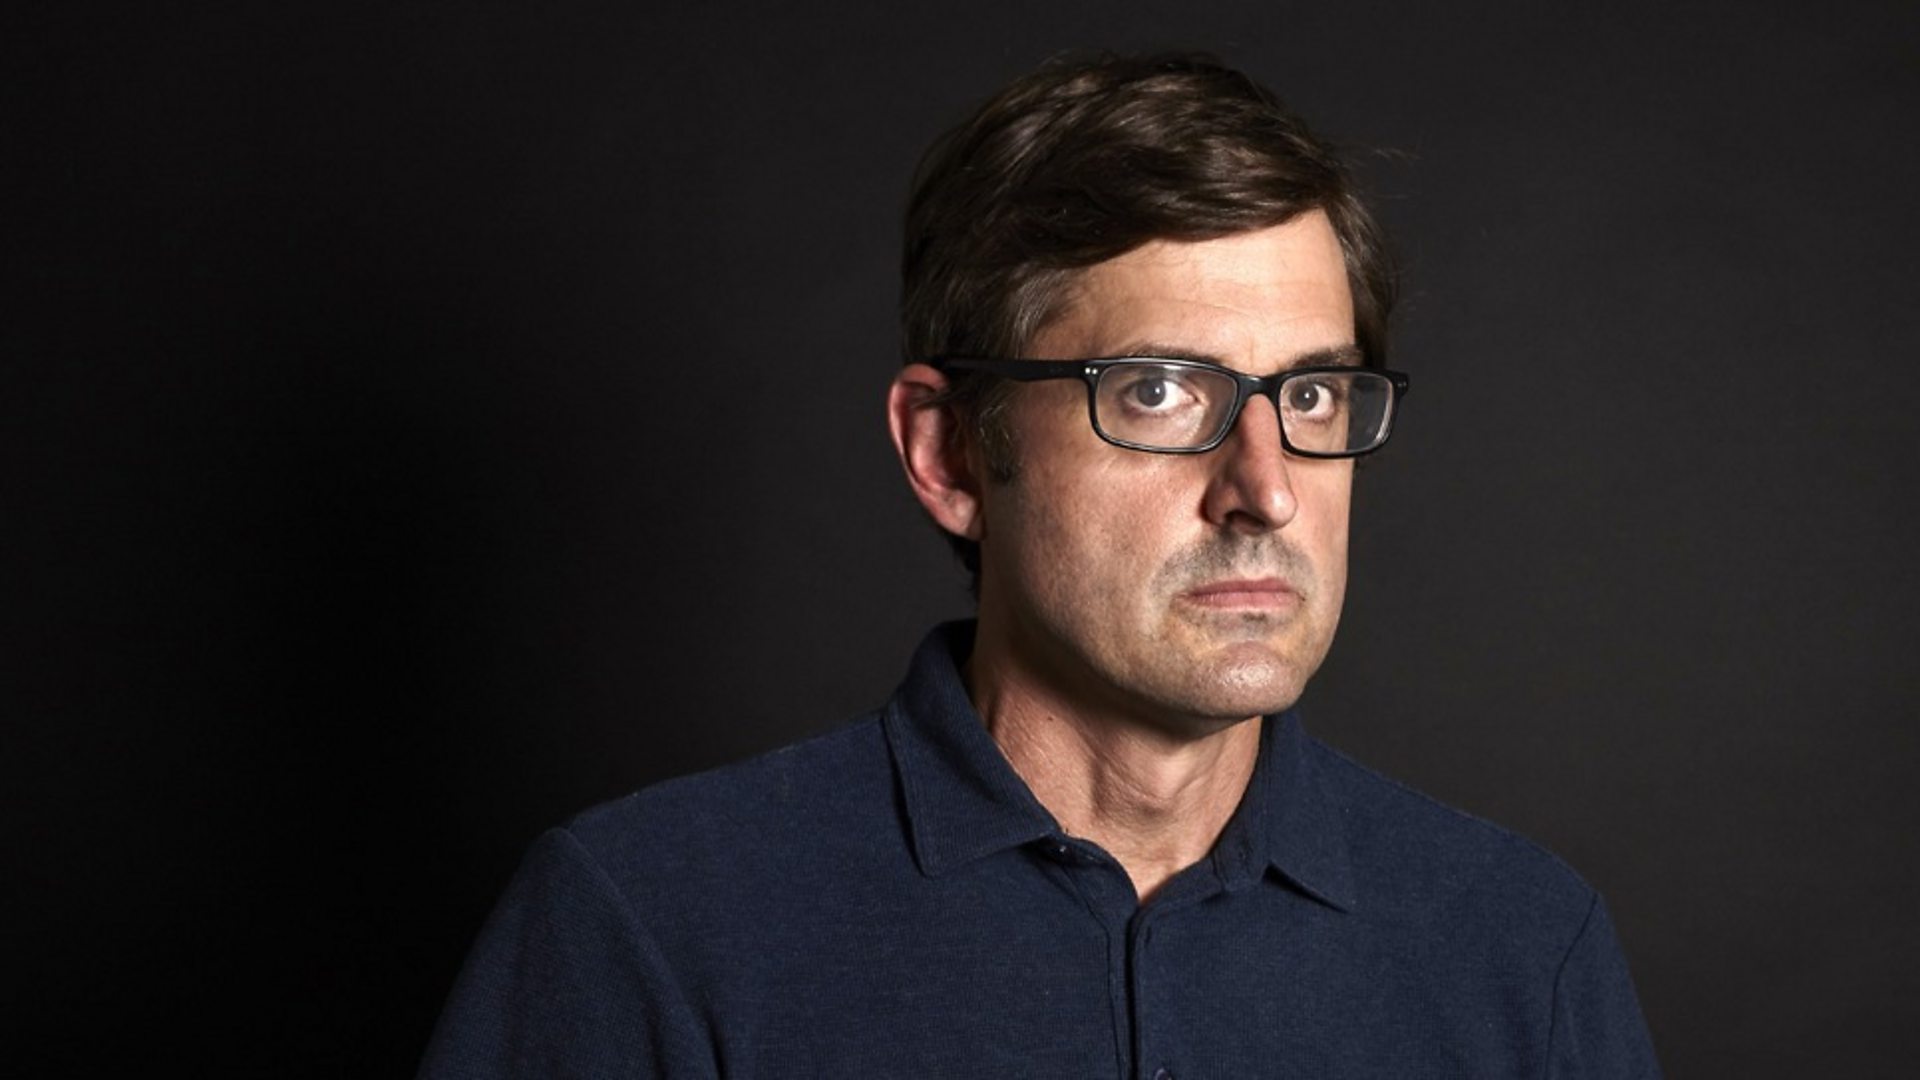 Louis Theroux revisits his encounter with Jimmy Savile